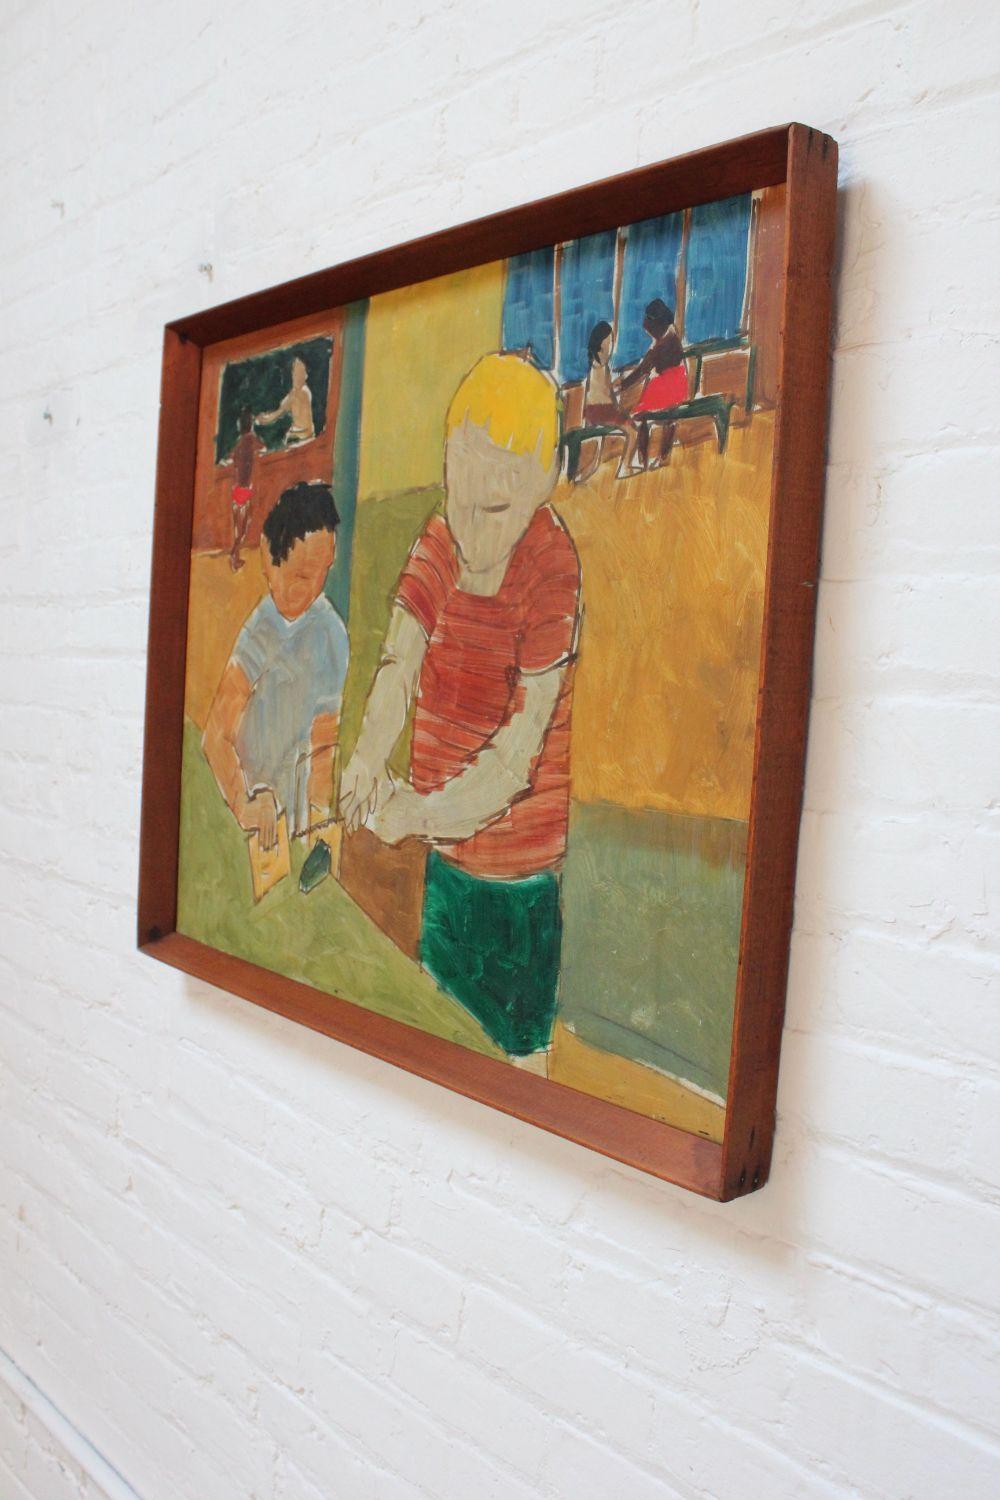 Abstract expressionist figural study of two boys in a camp setting working together on a craft project (ca. 1960s, USA).
There is some discoloration to the frame corners, along with general wear.
Canvas shows light soiling to the reverse.
Measures: